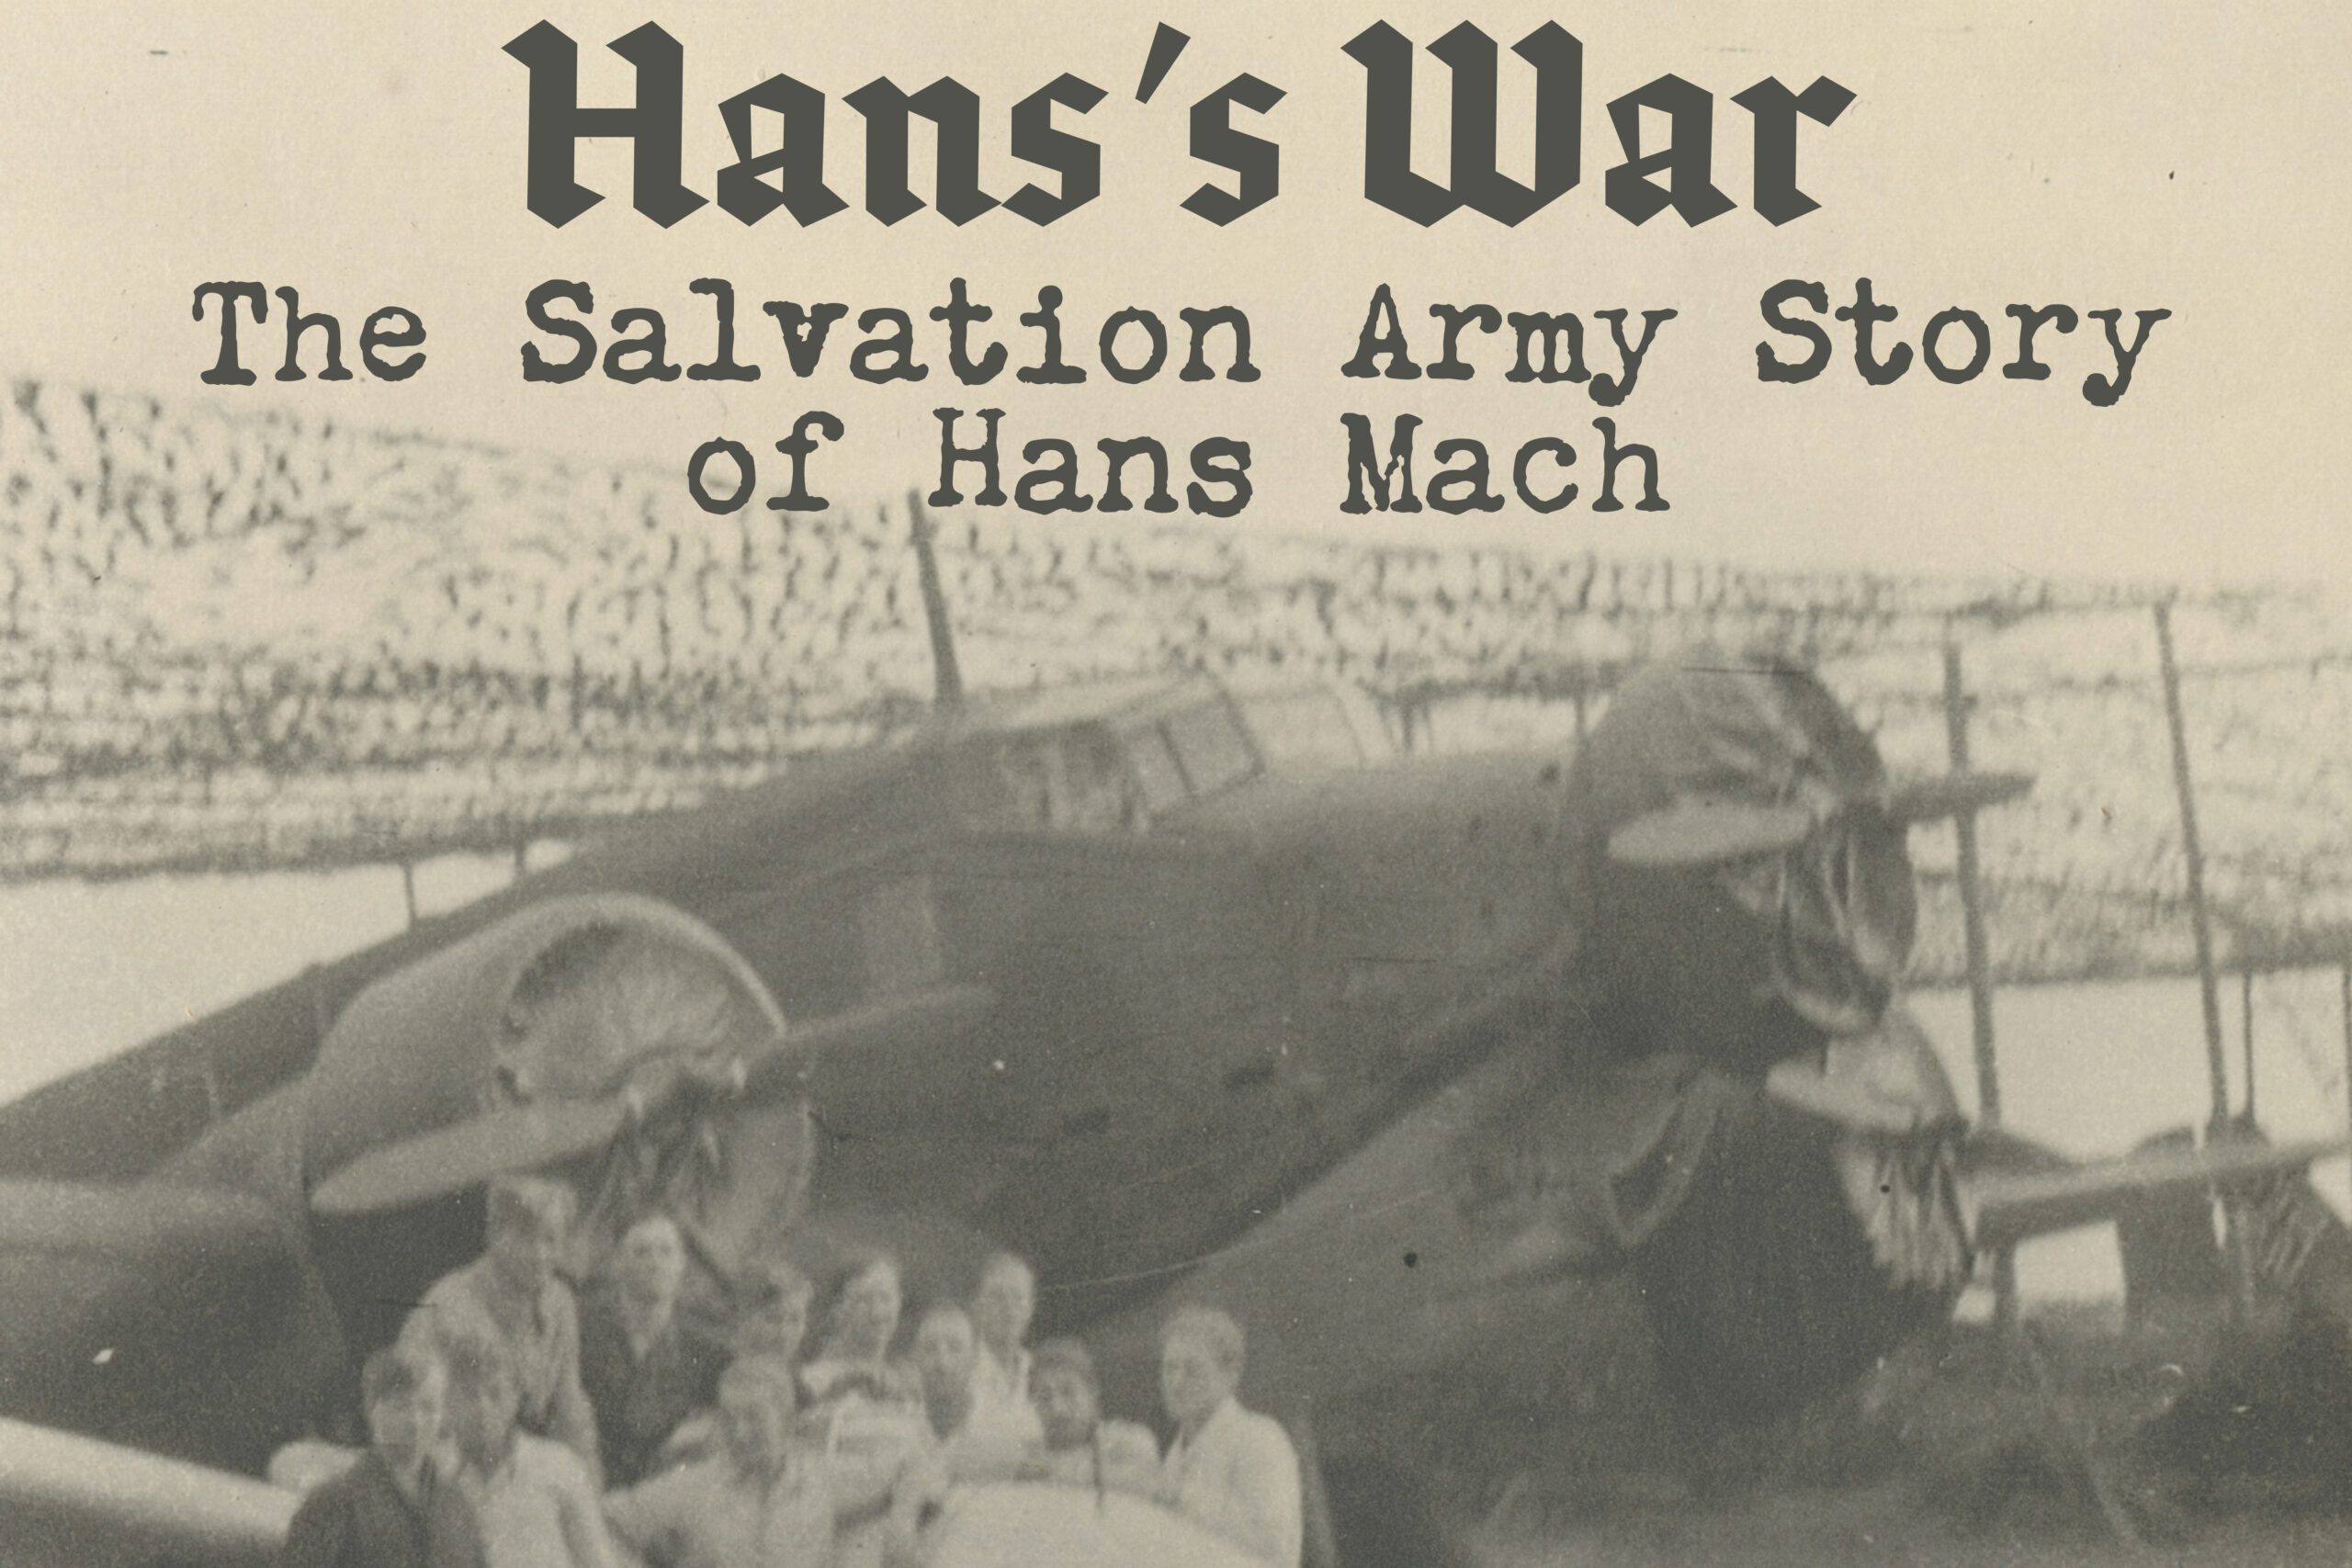 Black and white photographic label showing soldiers posing with a 1940s airplane. Text reads: "Hans's War: The Salvation Army Story of Hans Mach"